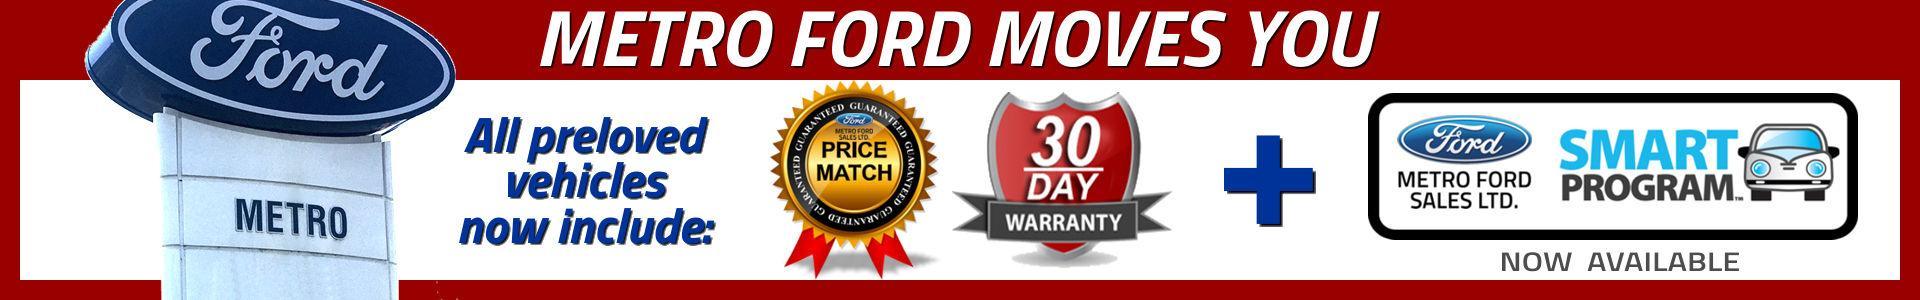 The Used Car Difference at Metro Ford, Calgary, Alberta